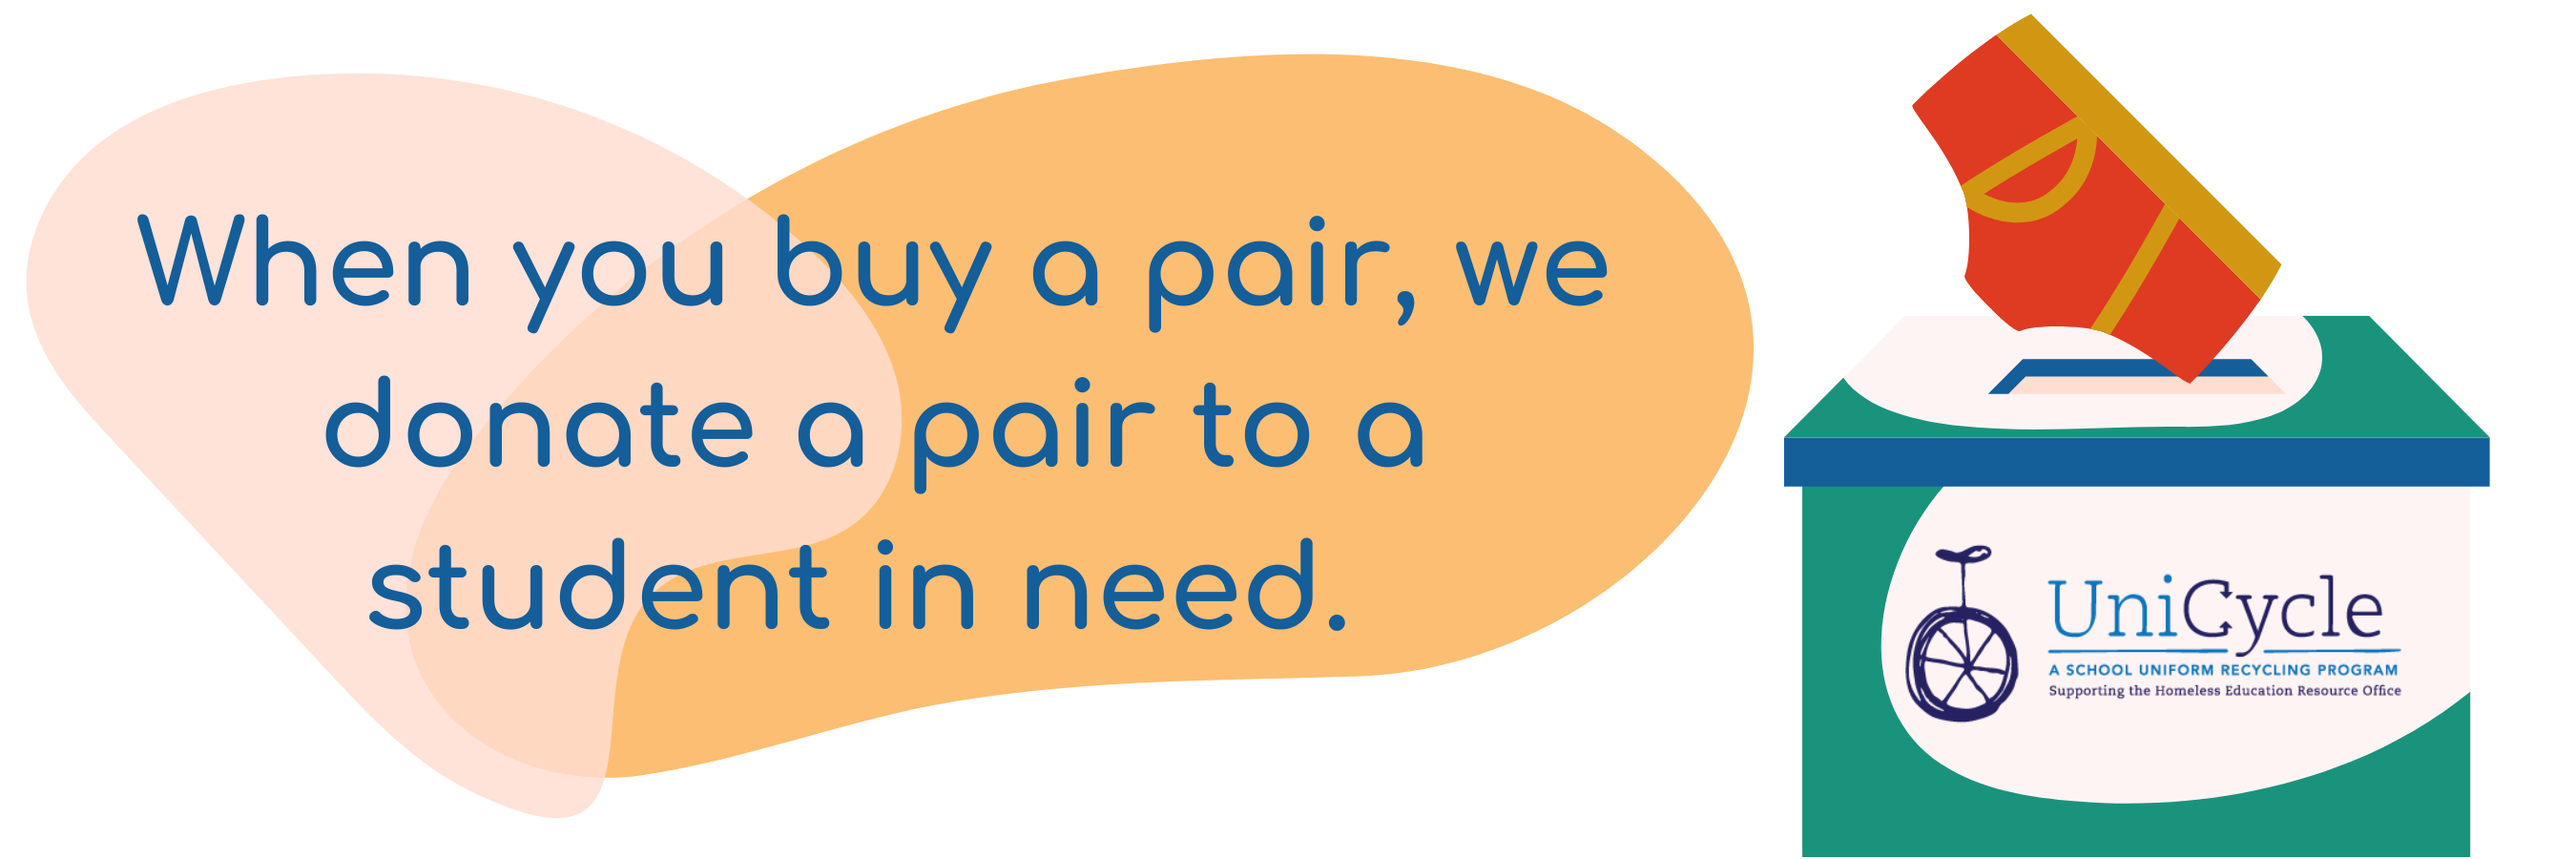 When you buy a pair of UNDERS, we donate a pair to a student in need through the UniCycle Program.